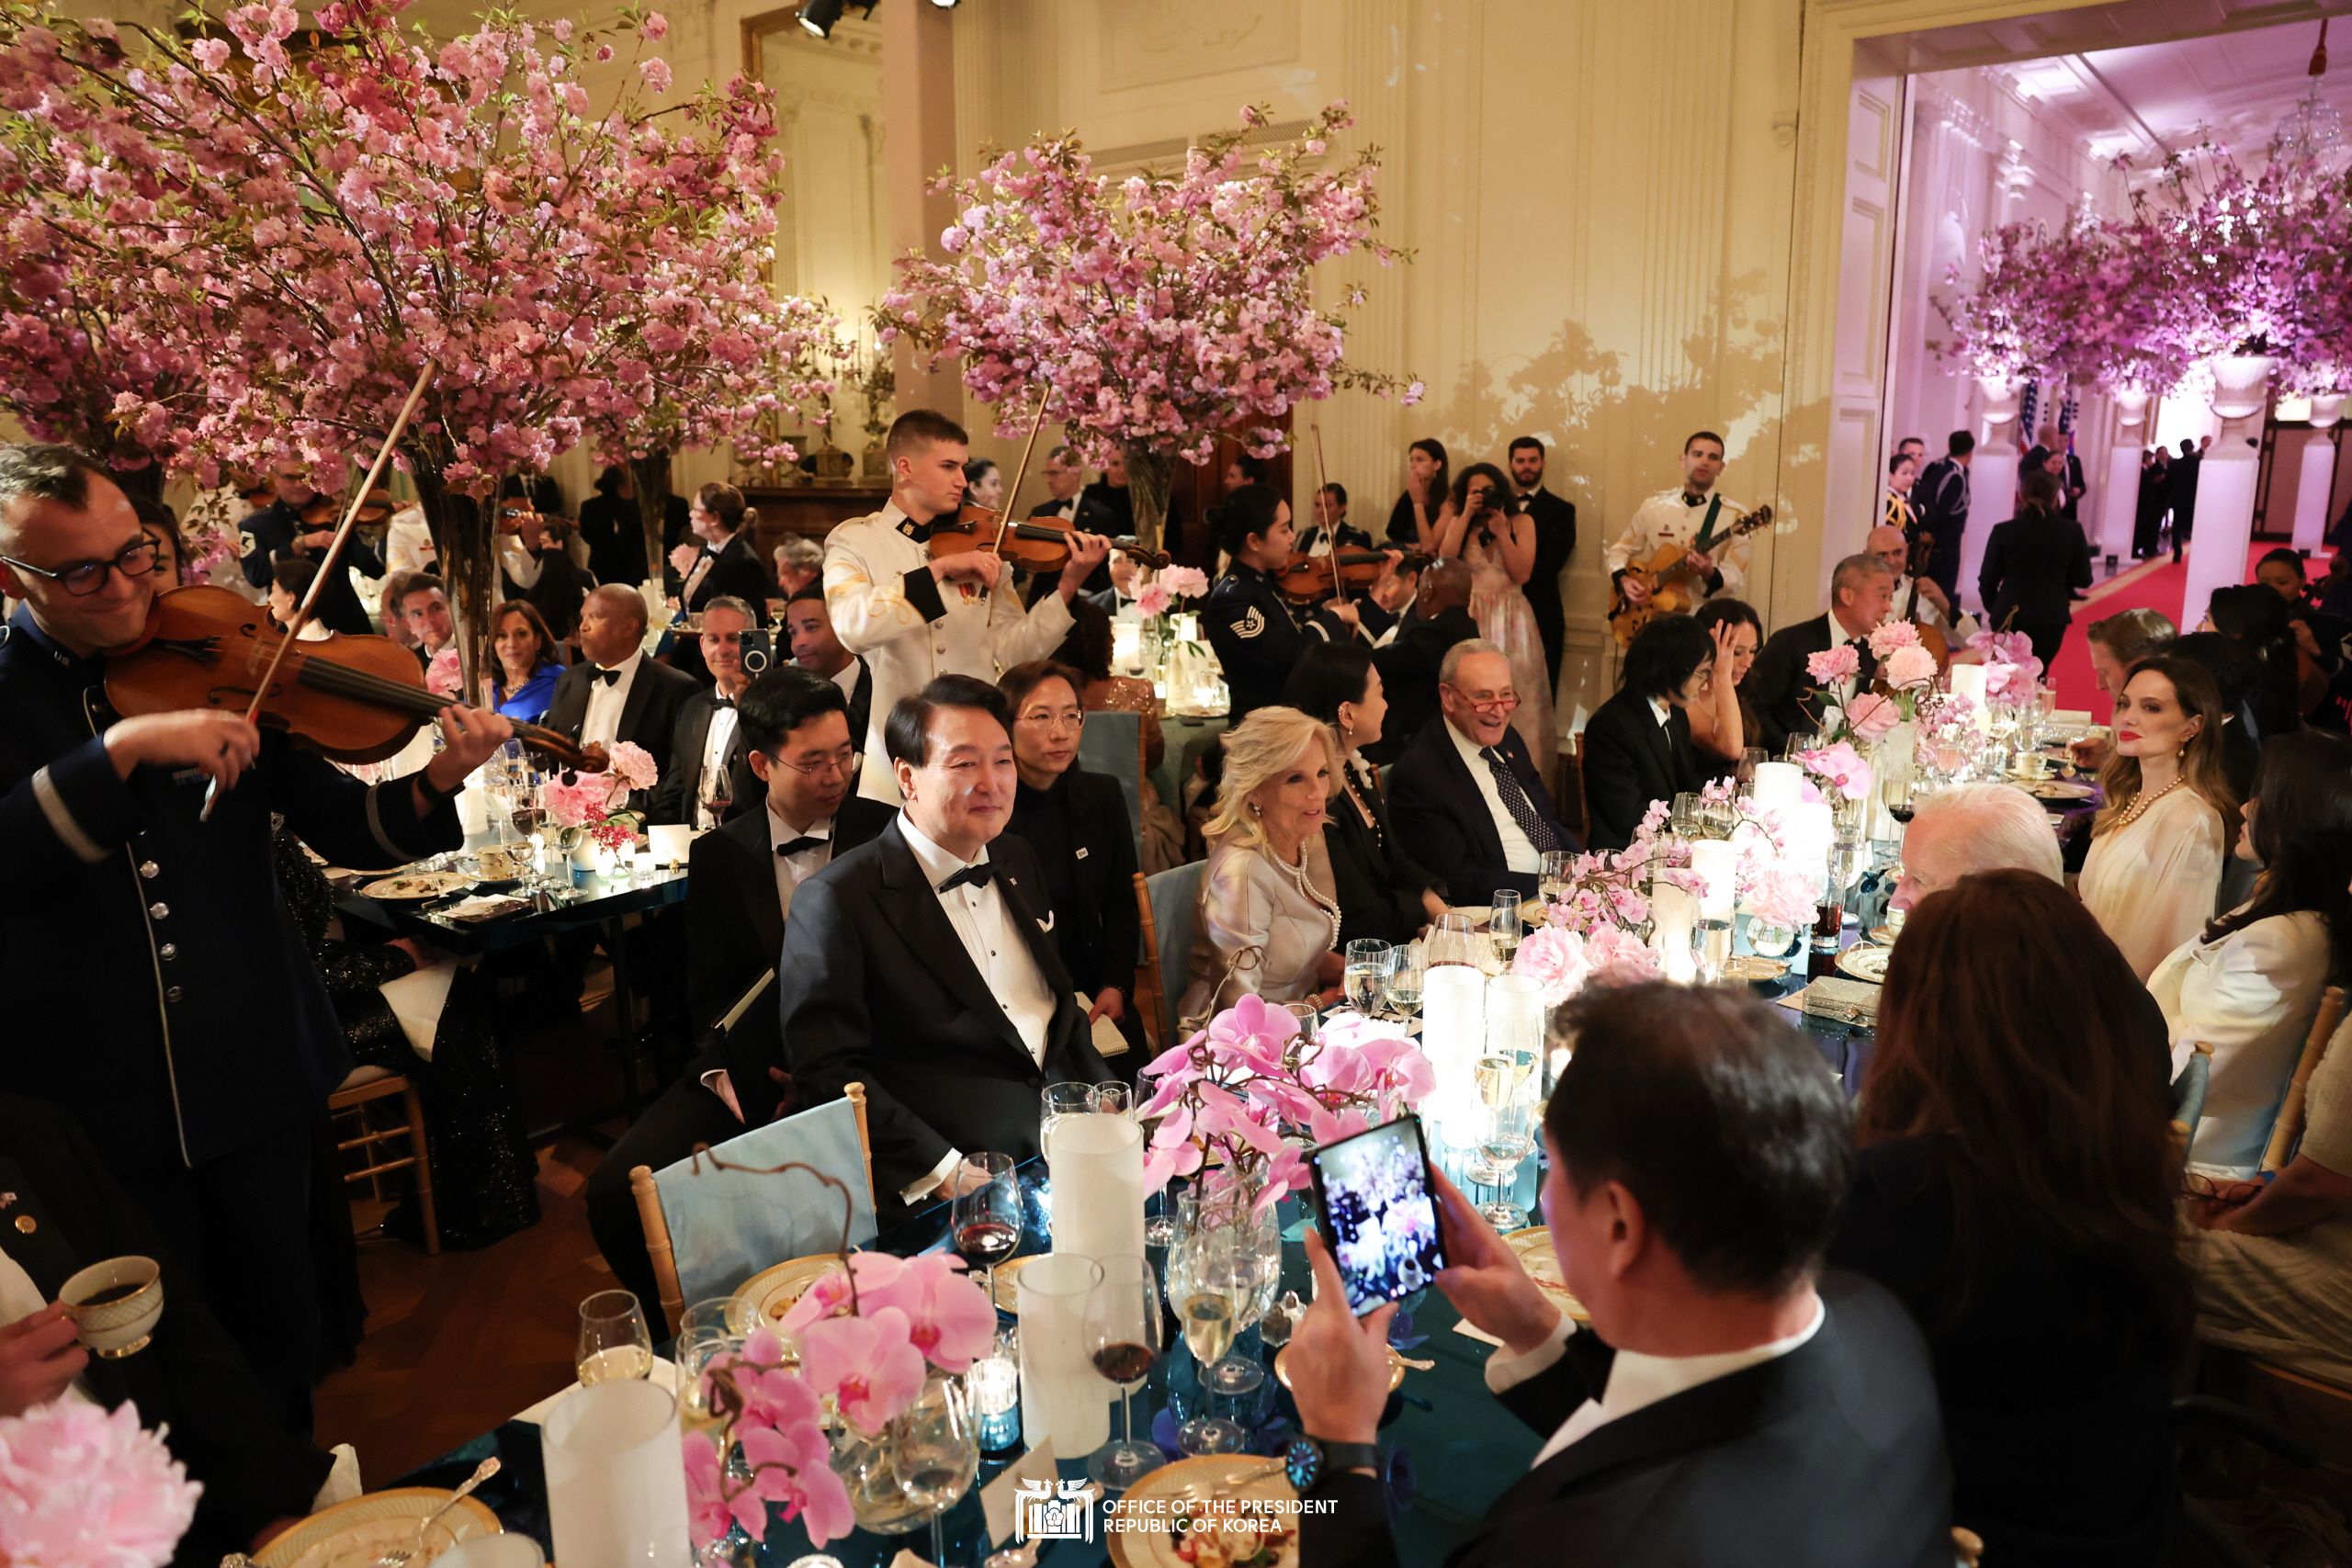 The President and First Lady attending the State Dinner hosted by the U.S. President and First Lady Slide18